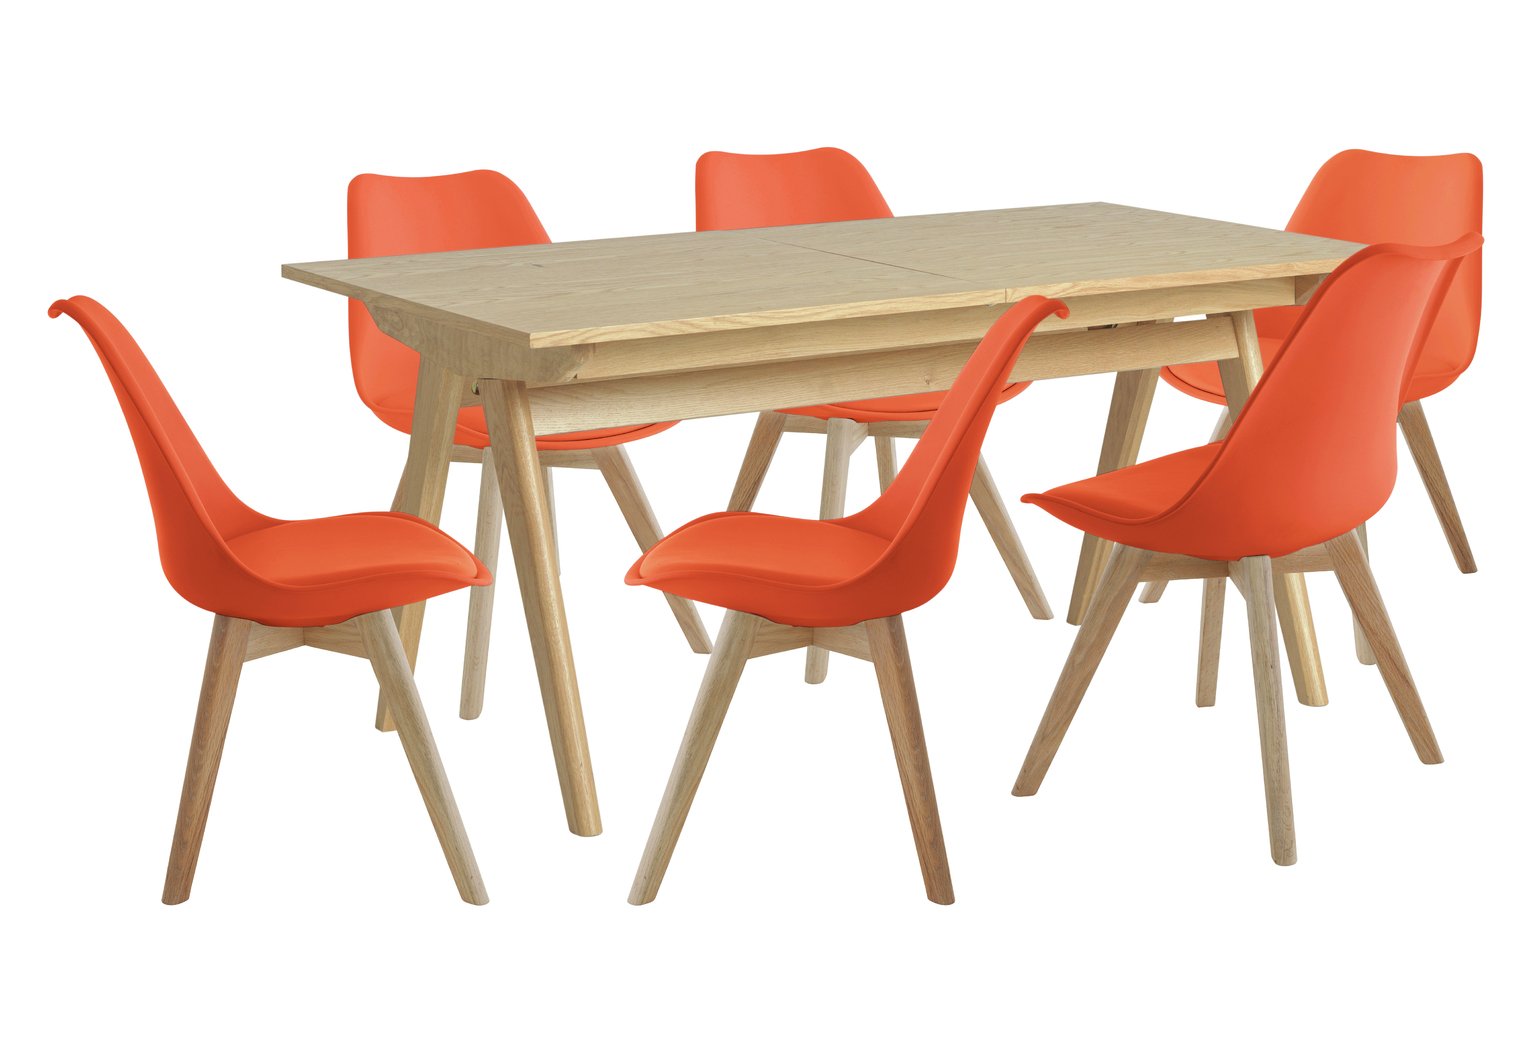 Habitat Jerry Wood Effect Dining Table & 6 Orange Chairs